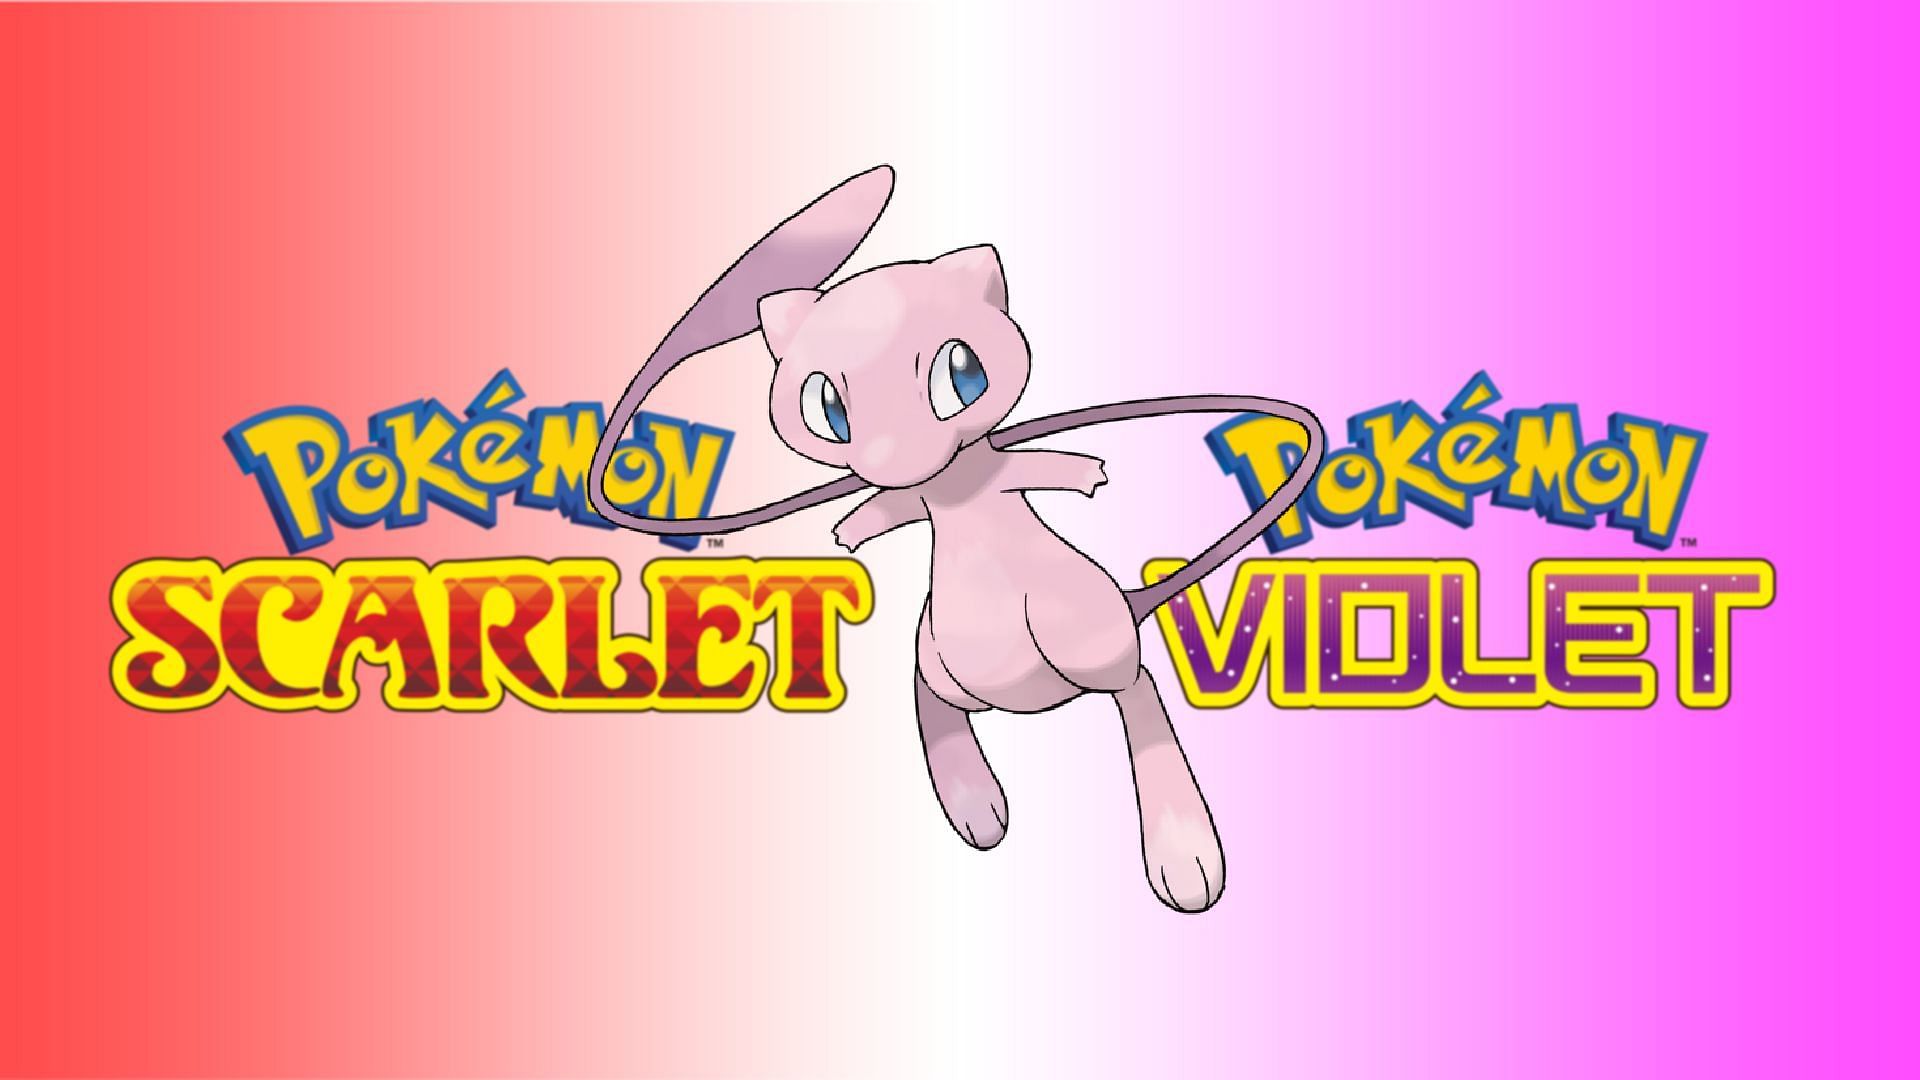 Getting your very own Mew in Pokemon Scarlet and Violet (Image via The Pokemon Company)